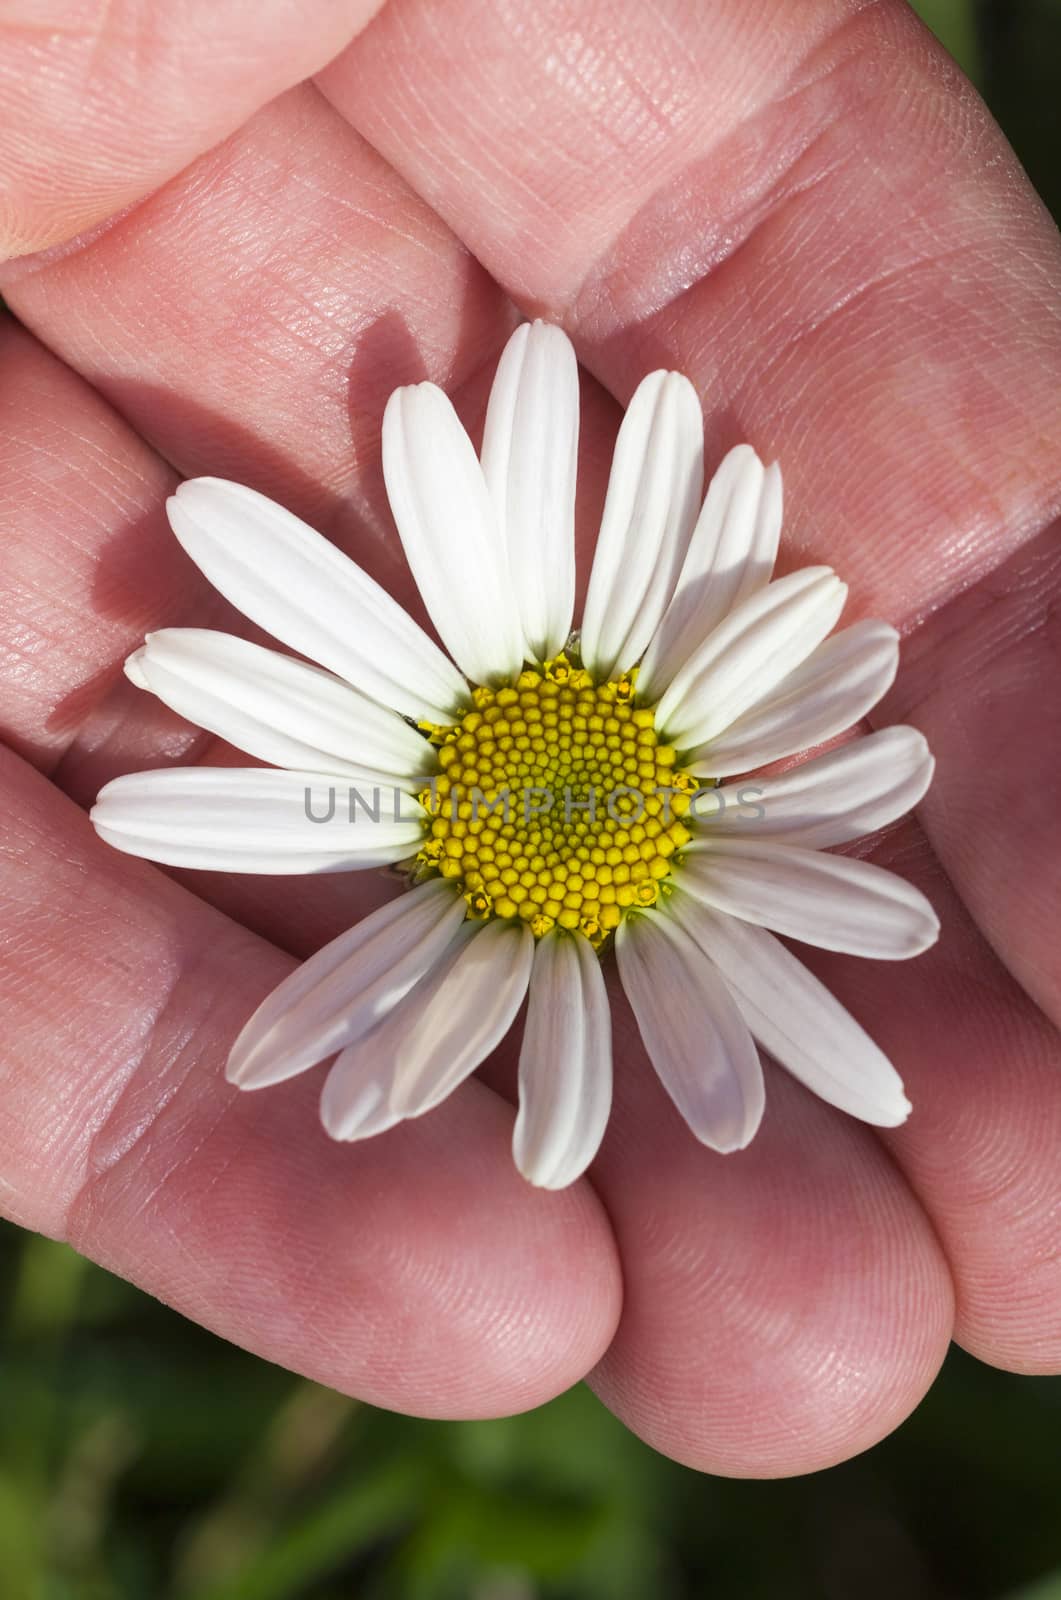 camomile flower close-up by avq